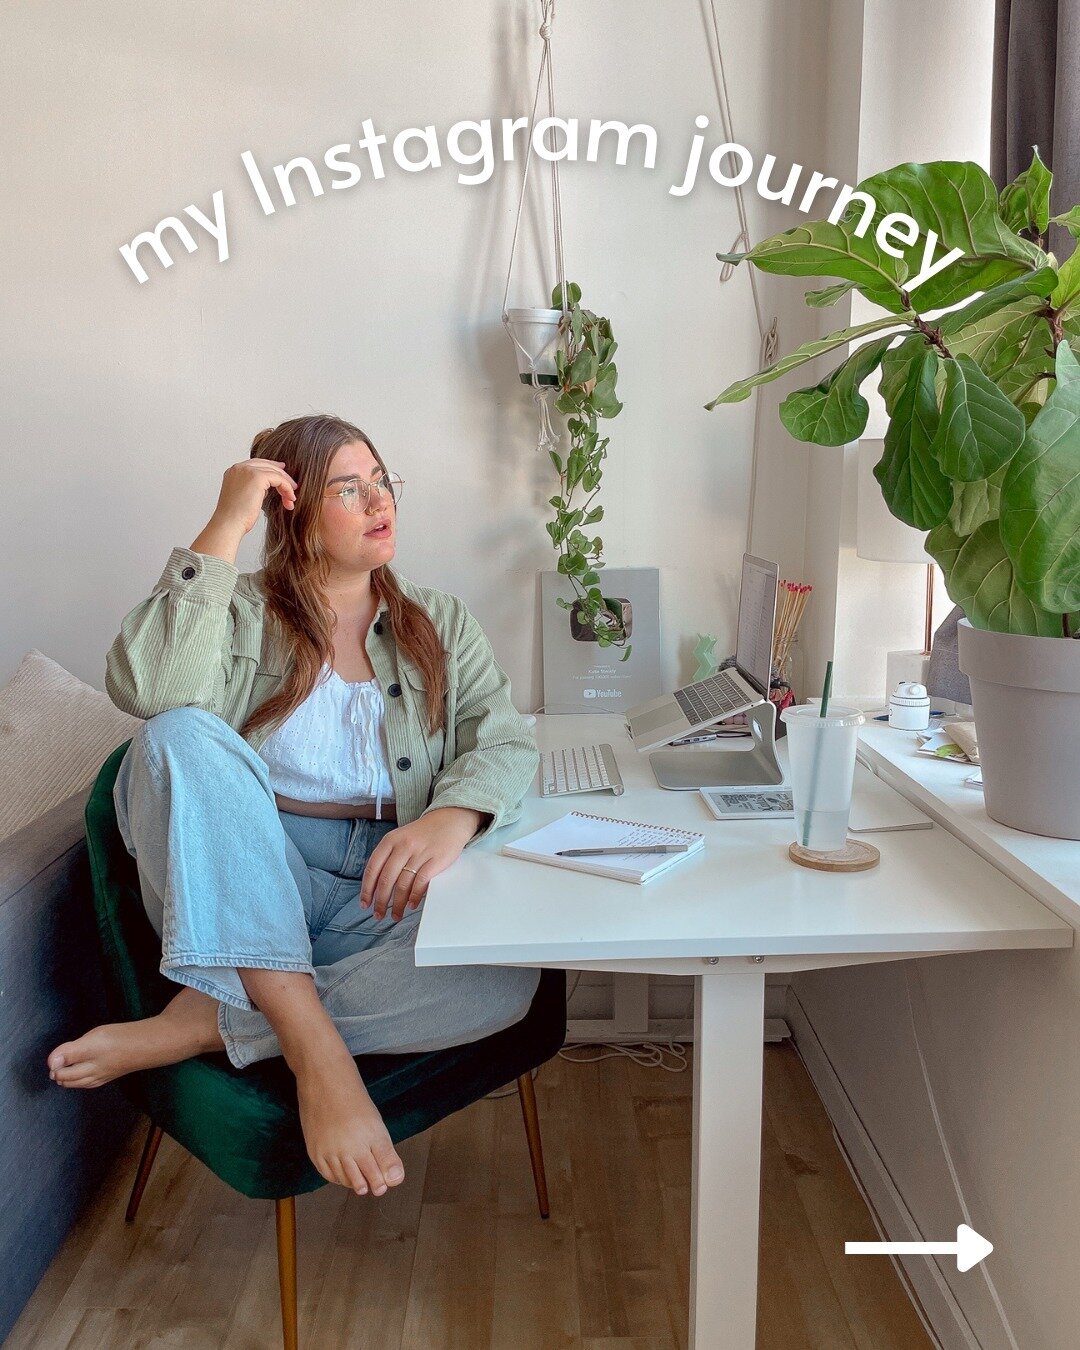 Let's take a walk down memory lane, shall we? Growing as a content creator on any platform, including Instagram, is a journey.⁠
⁠
And every journey includes ups and downs, moments of self-doubt, and moments of celebration.⁠
⁠
And my goal with my new 